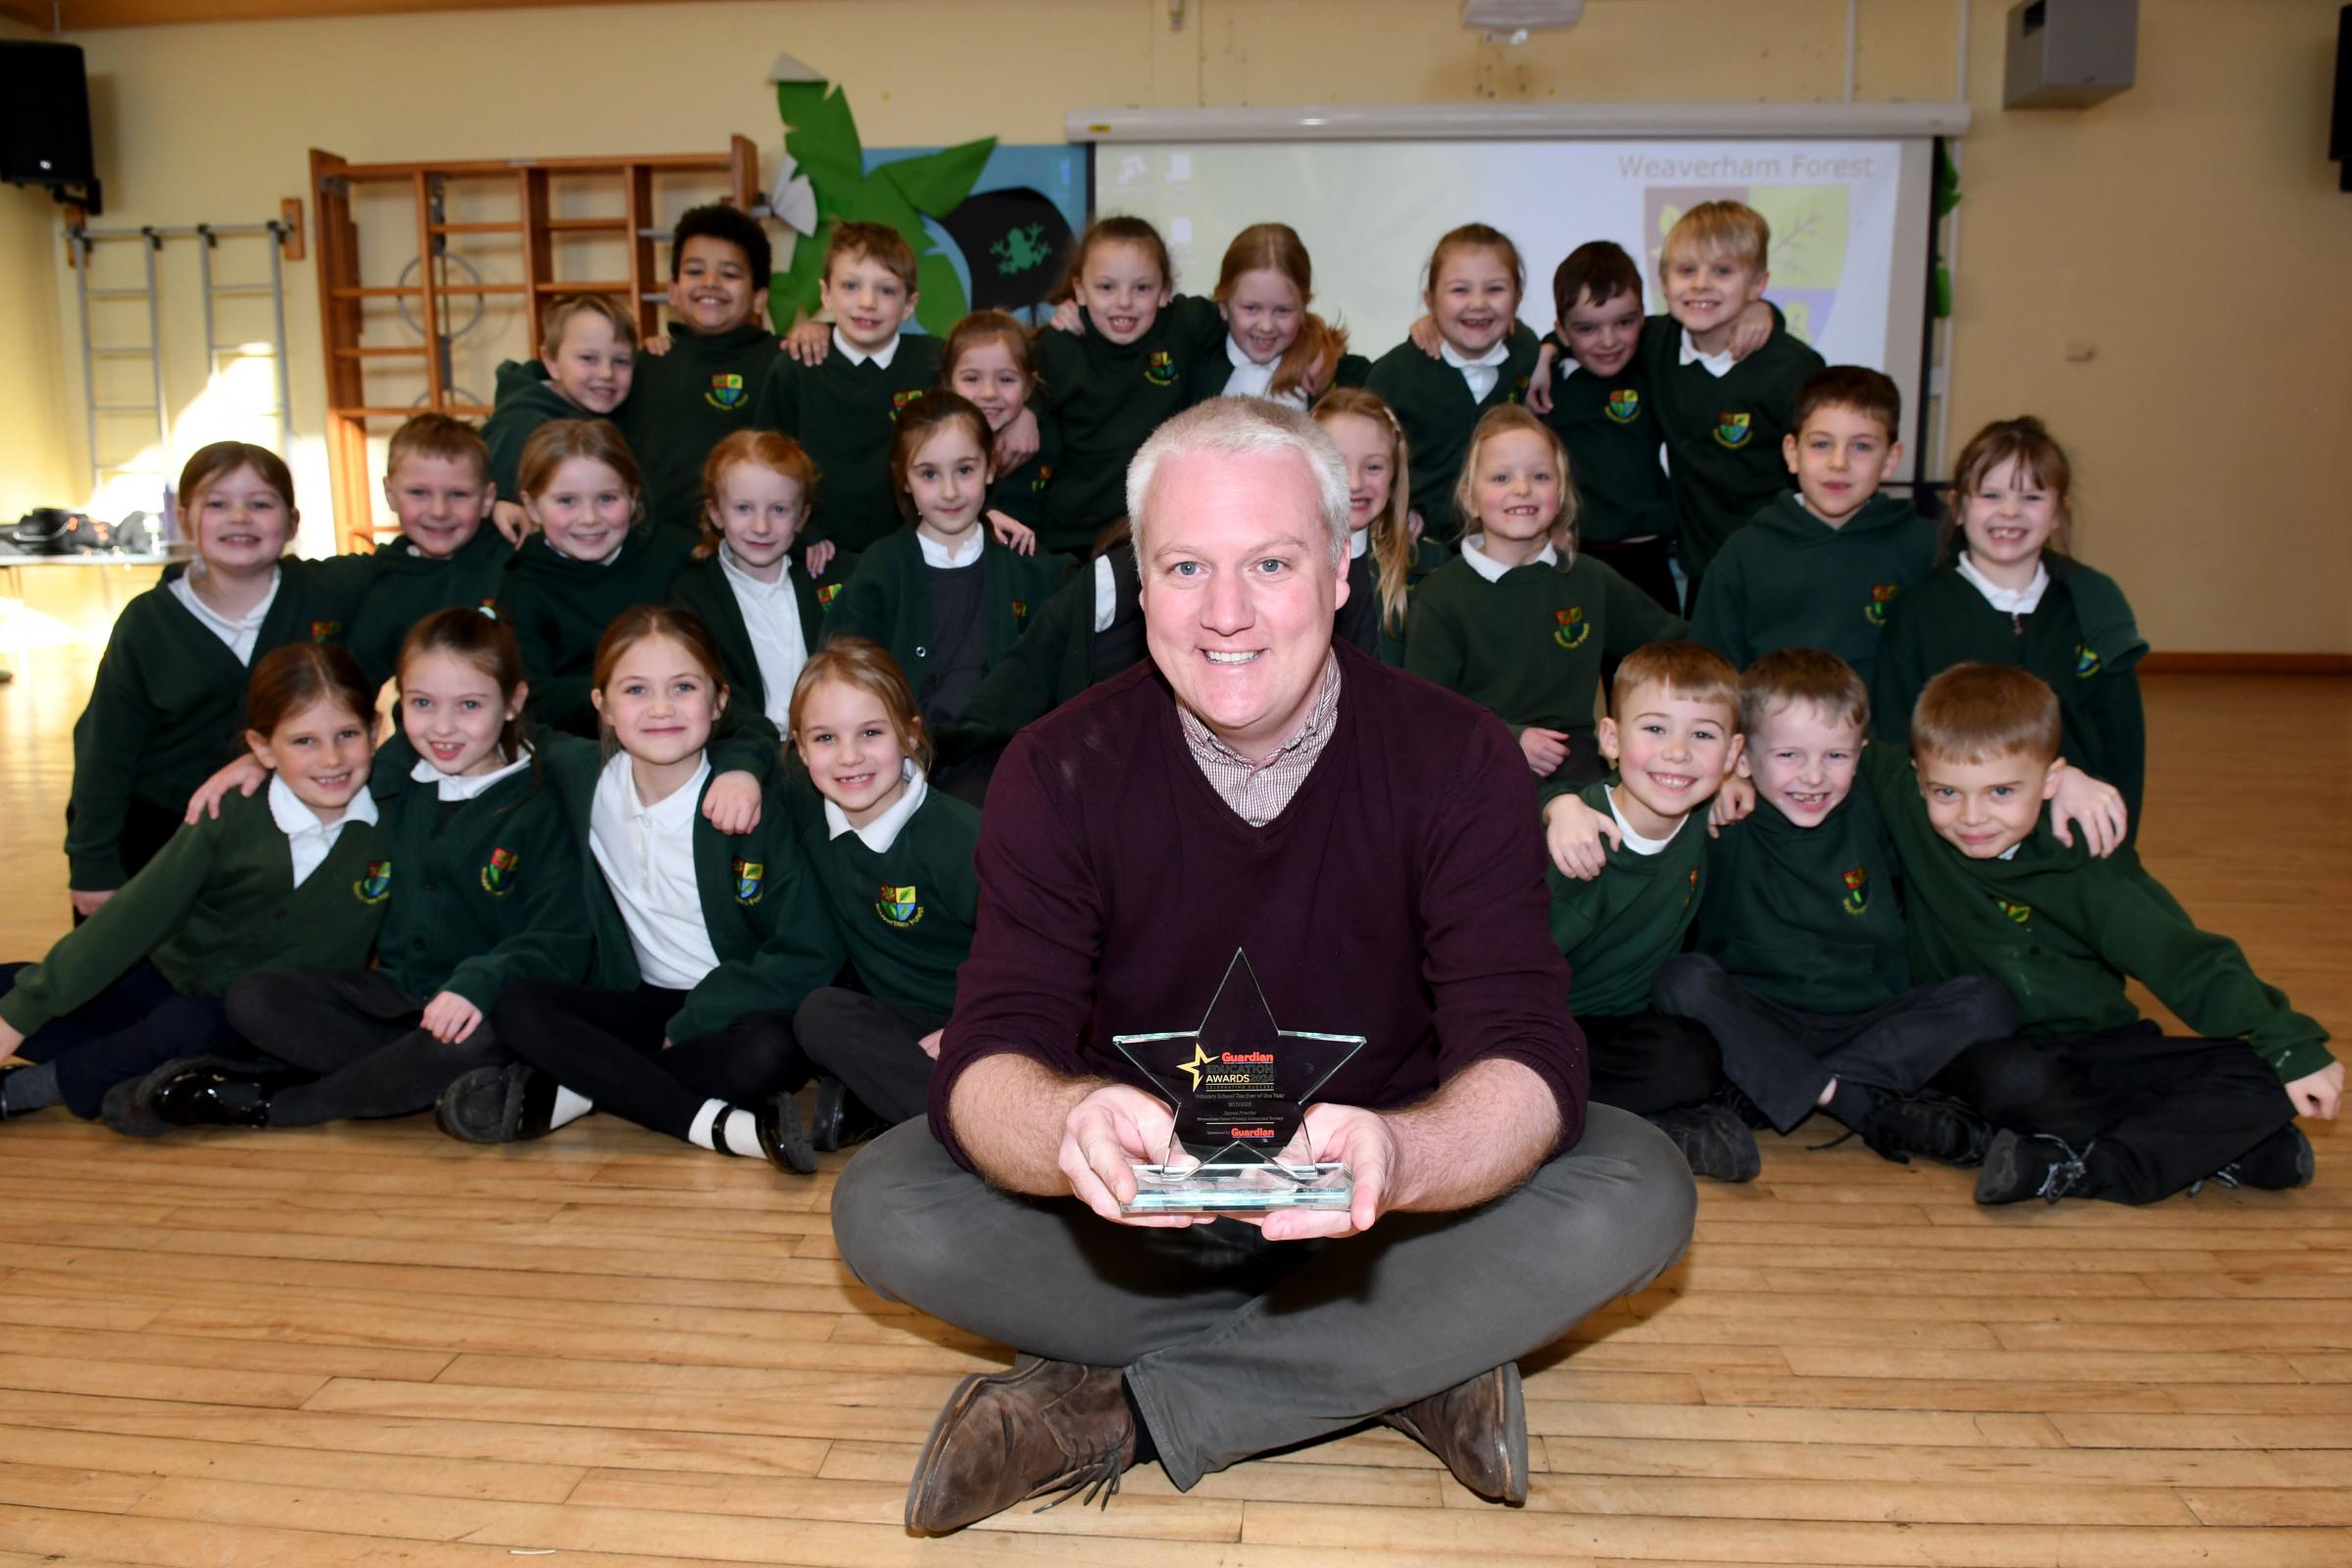 Primary School Teacher of the Year celebrates with his year two class1